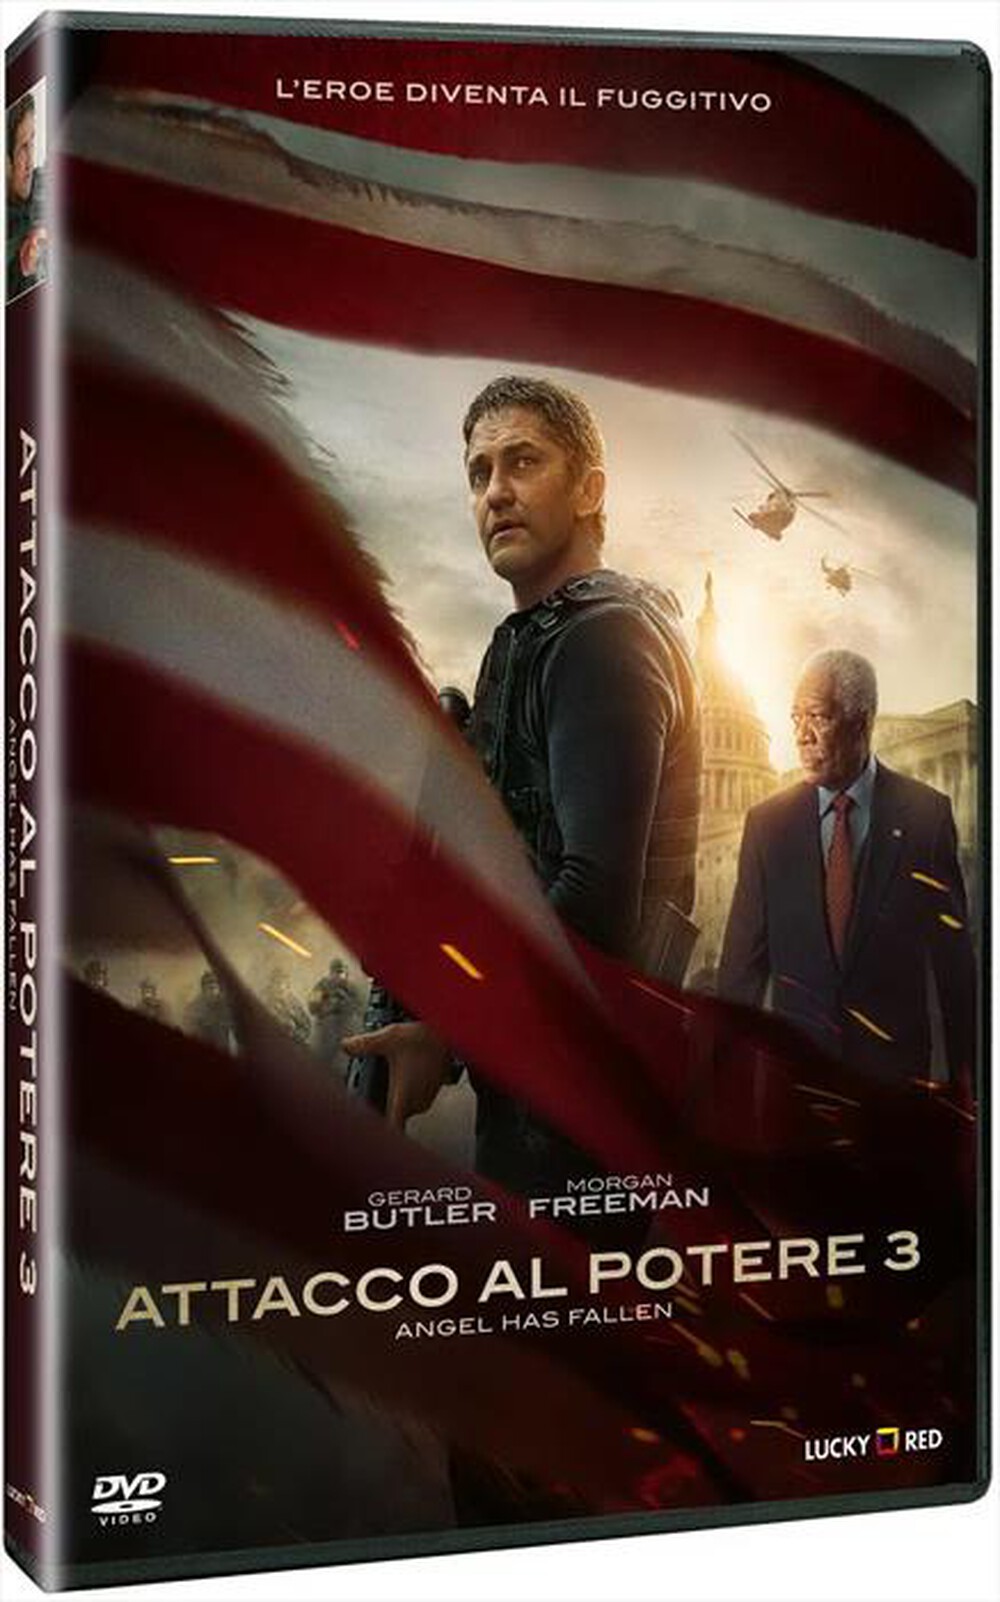 "LUCKY RED - Attacco Al Potere 3 - Angel Has Fallen"